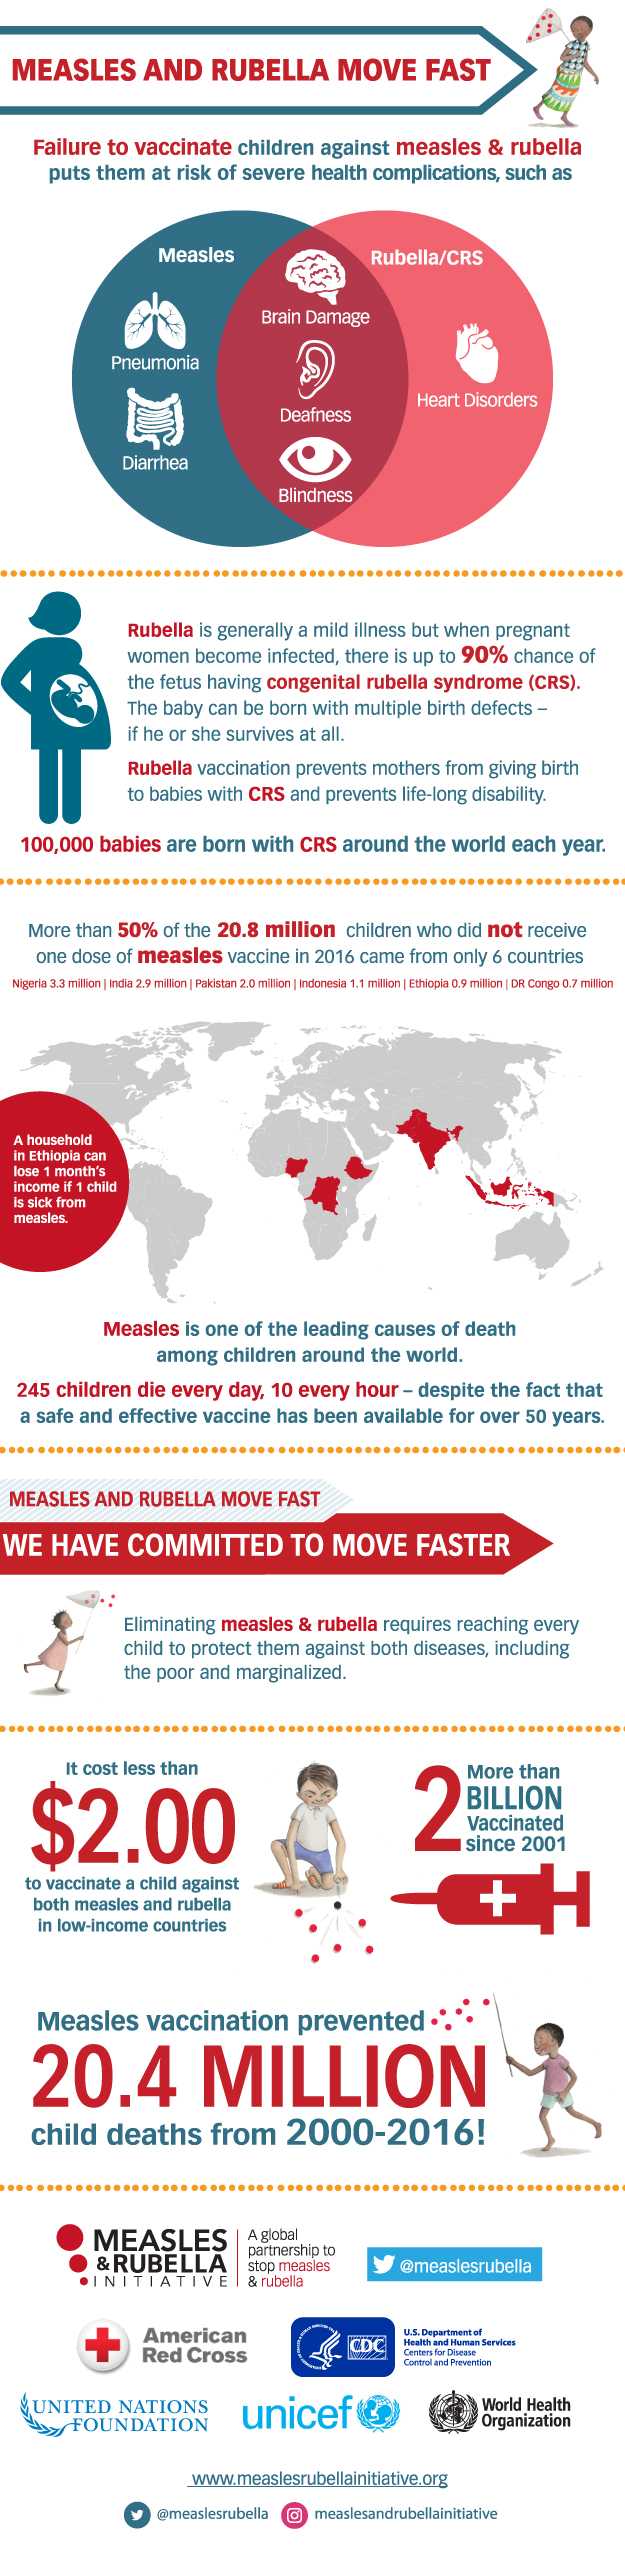 Measles & Rubella move Fast - Infographic